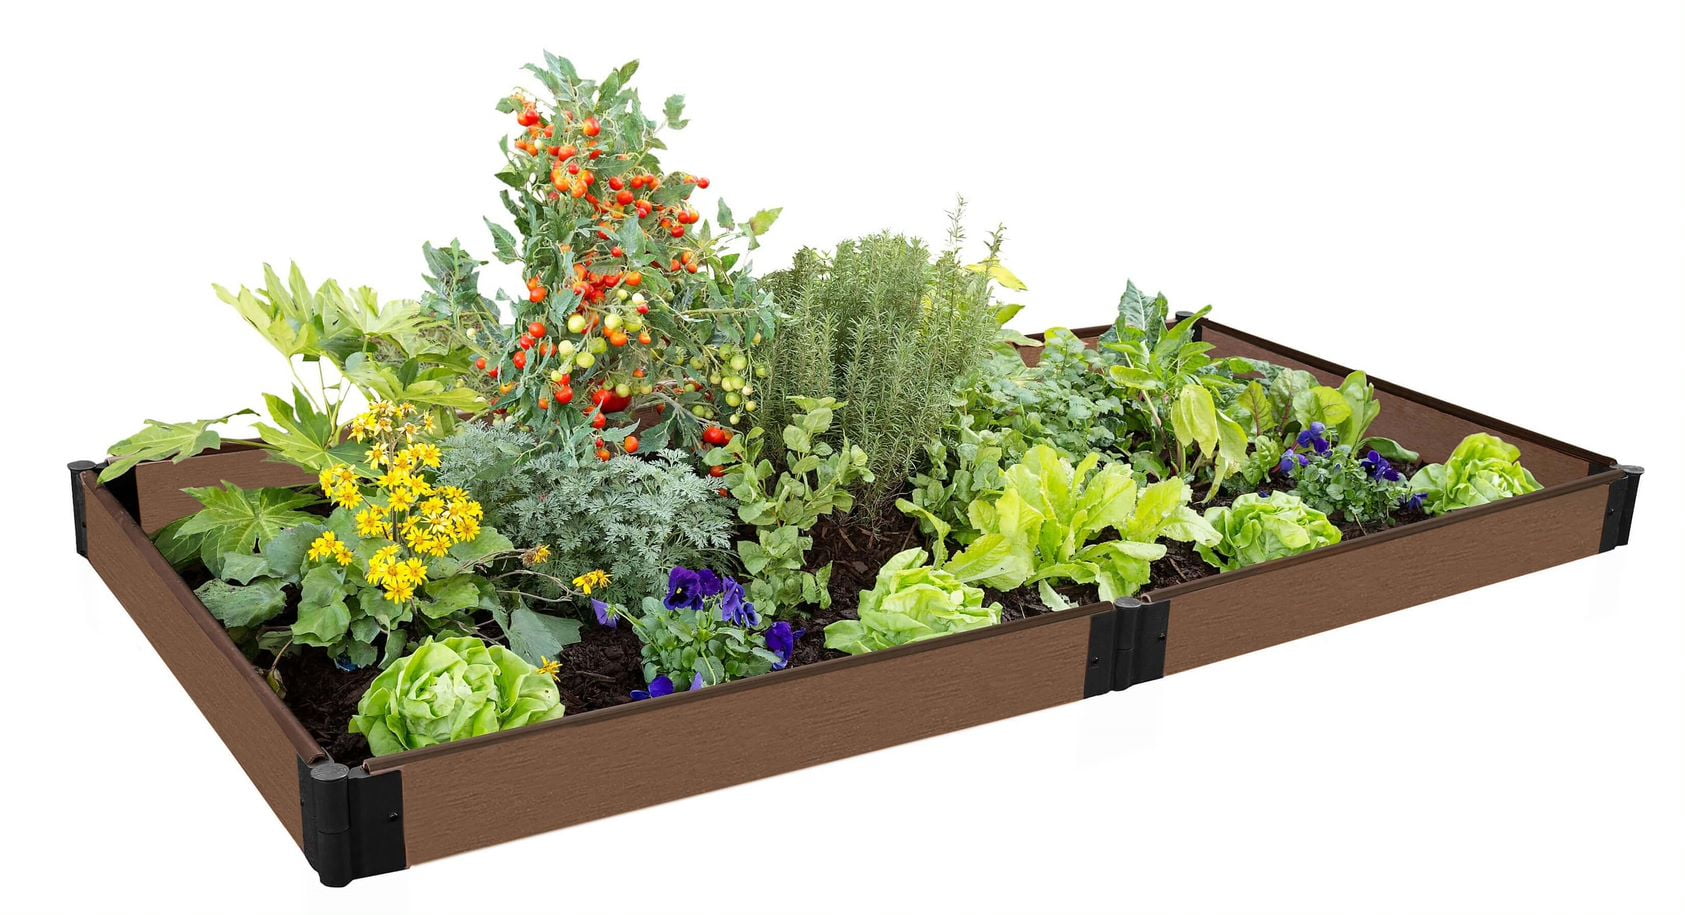 Frame It All Tool-free Weathered Wood Raised Garden Bed 4 X 8 X 55 - 1 Profile - Walmartcom